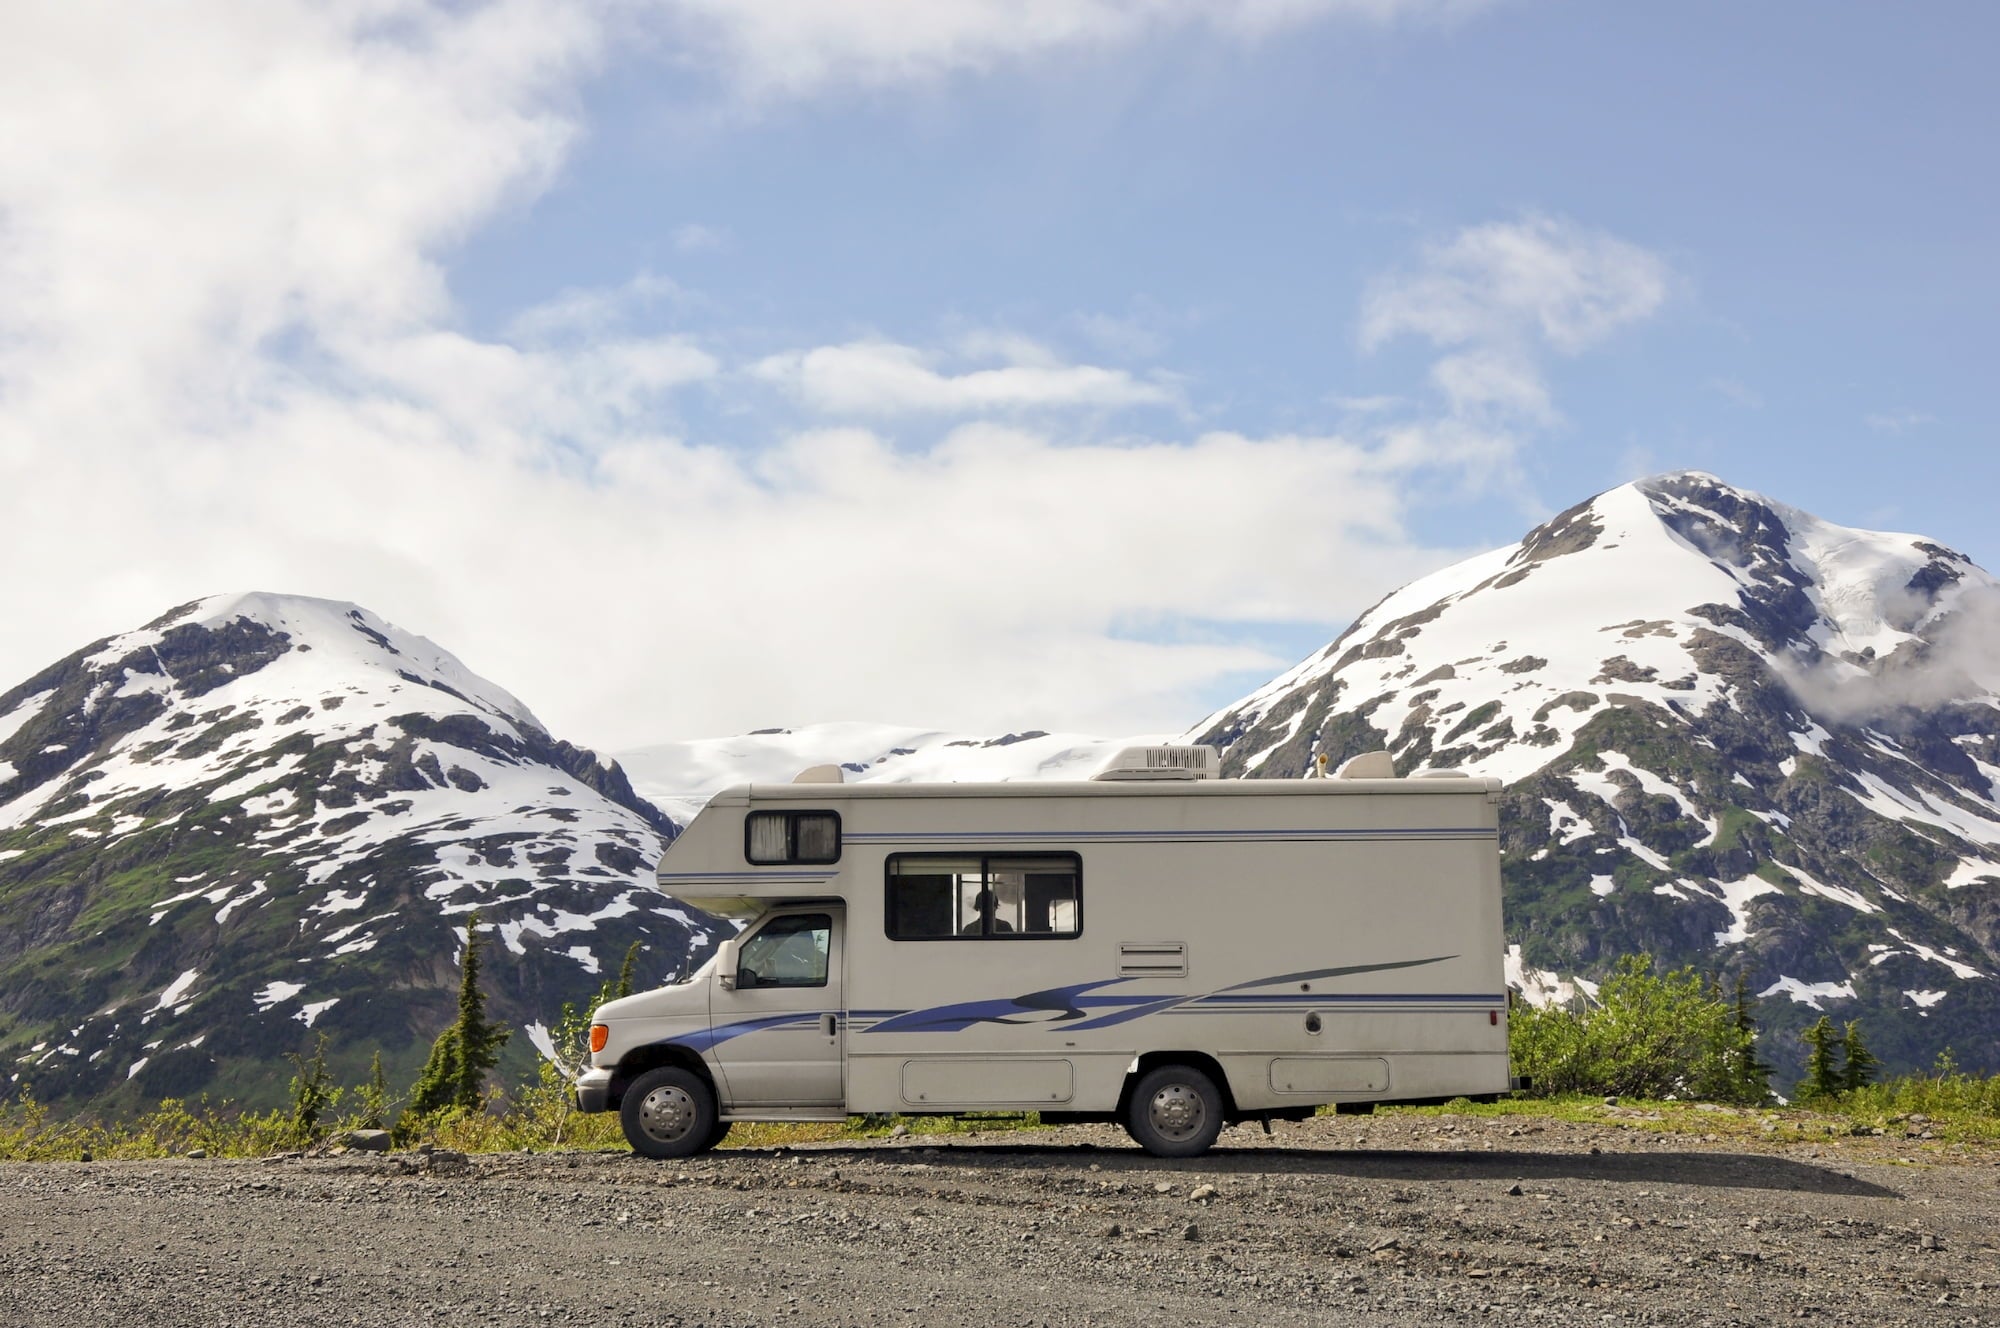 How to Go RV Camping in the Winter, According to RV Experts